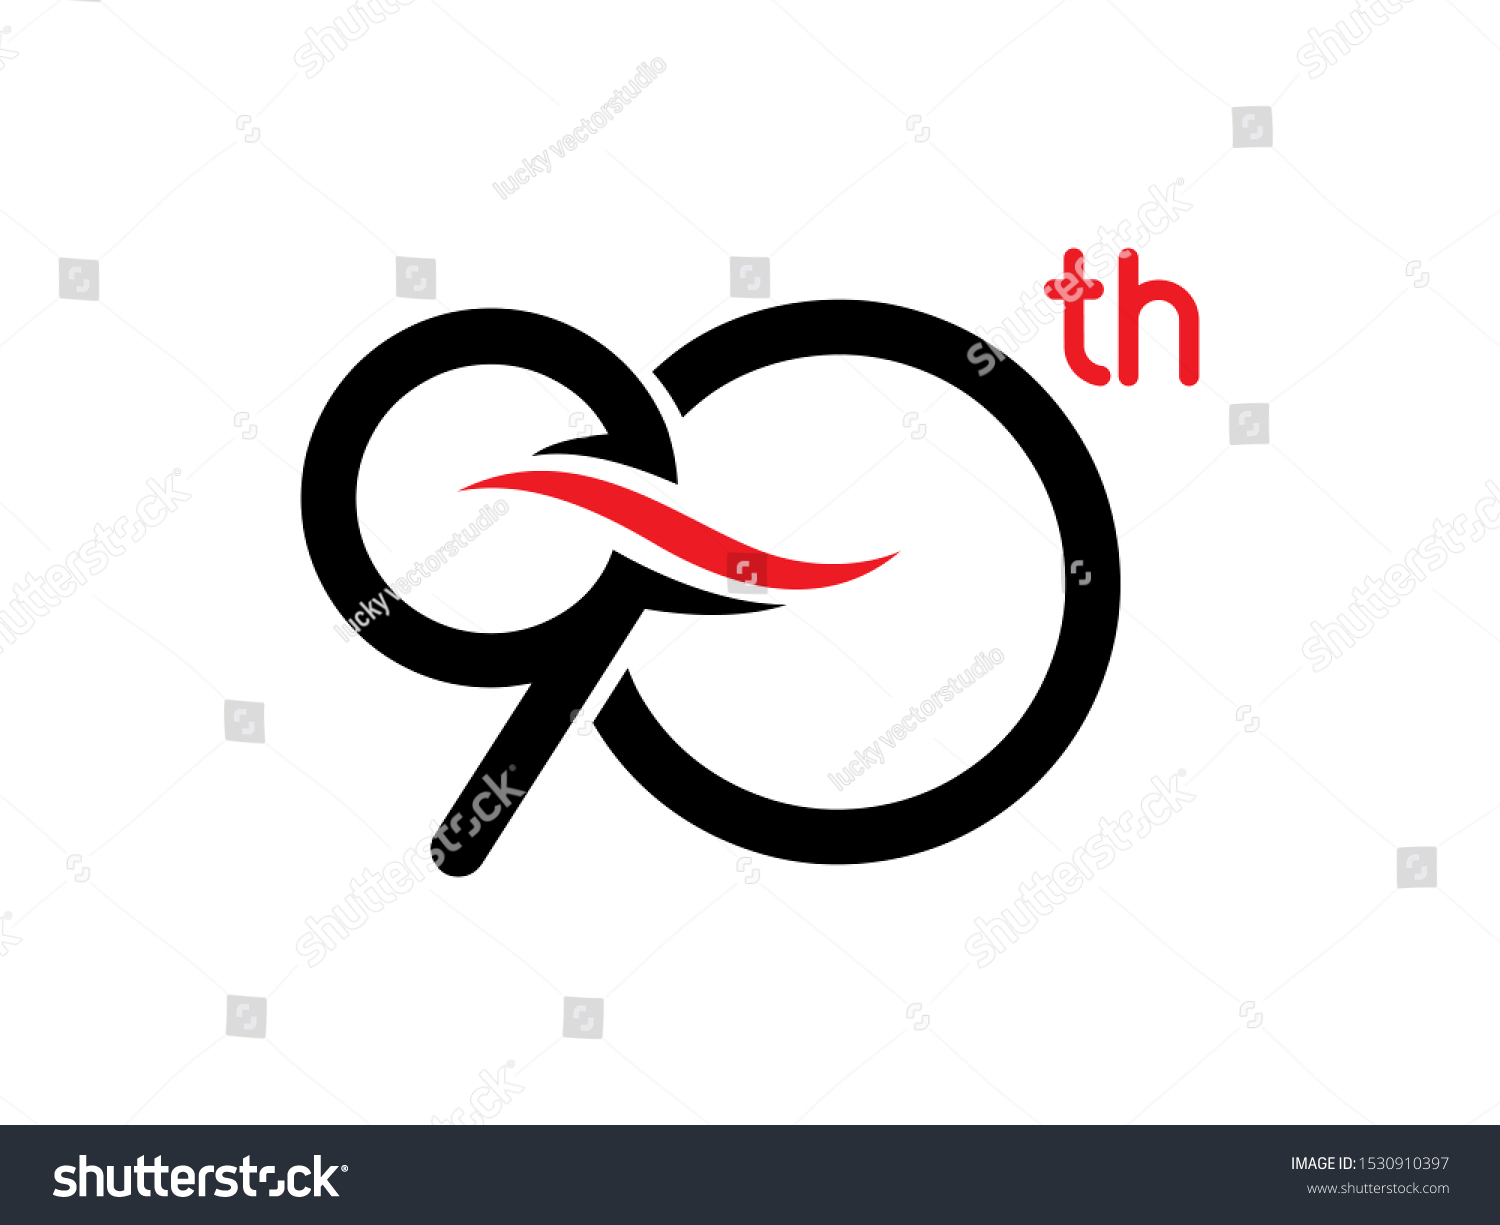 Number 90 logo or symbol template design - Royalty Free Stock Vector ...